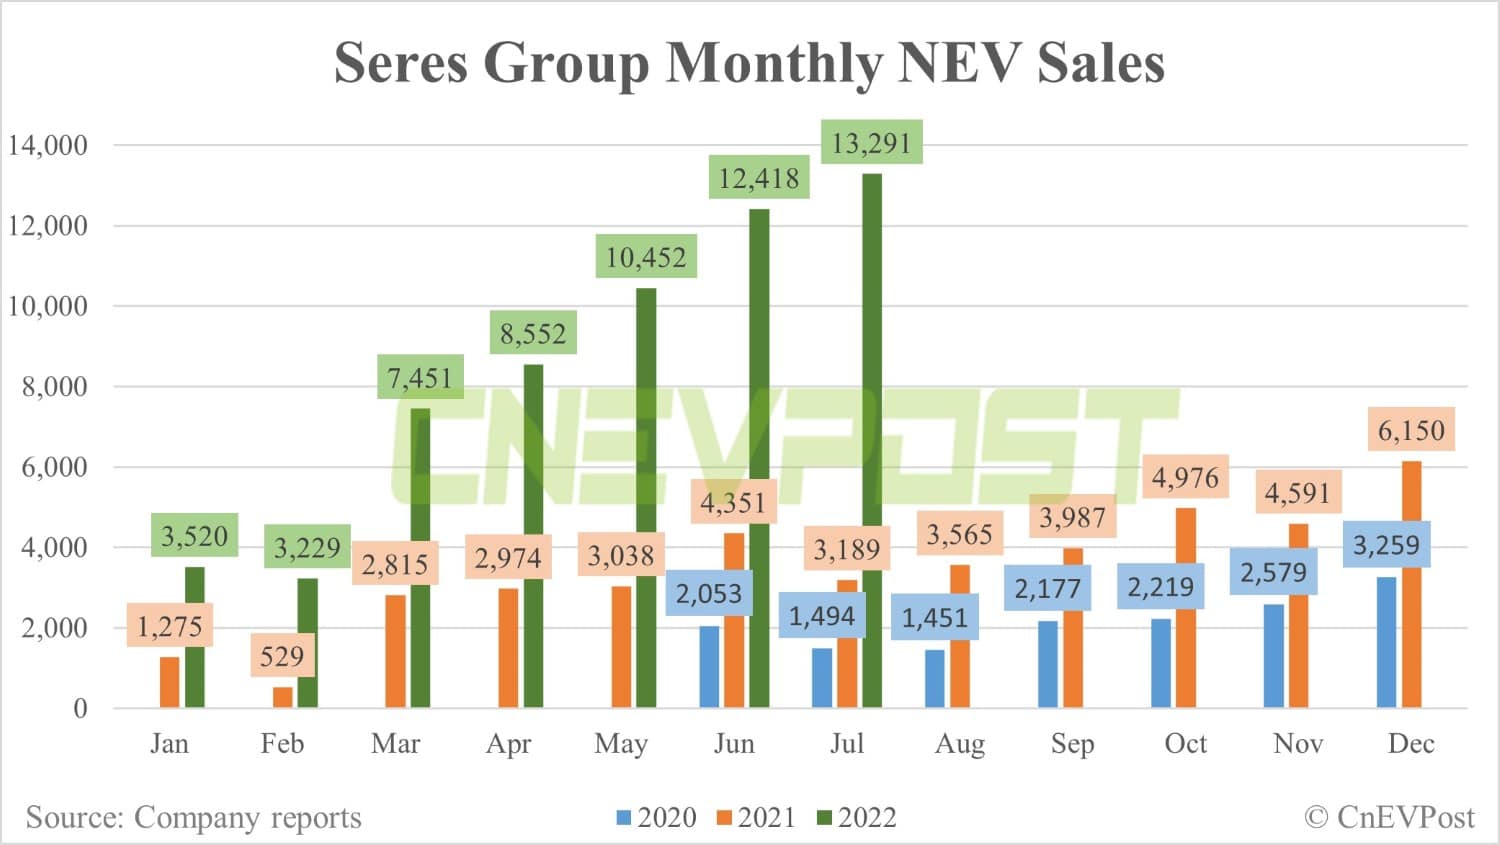 Chongqing Sokon officially renamed as Seres Group, reports 13,291 NEV sales in July-CnEVPost